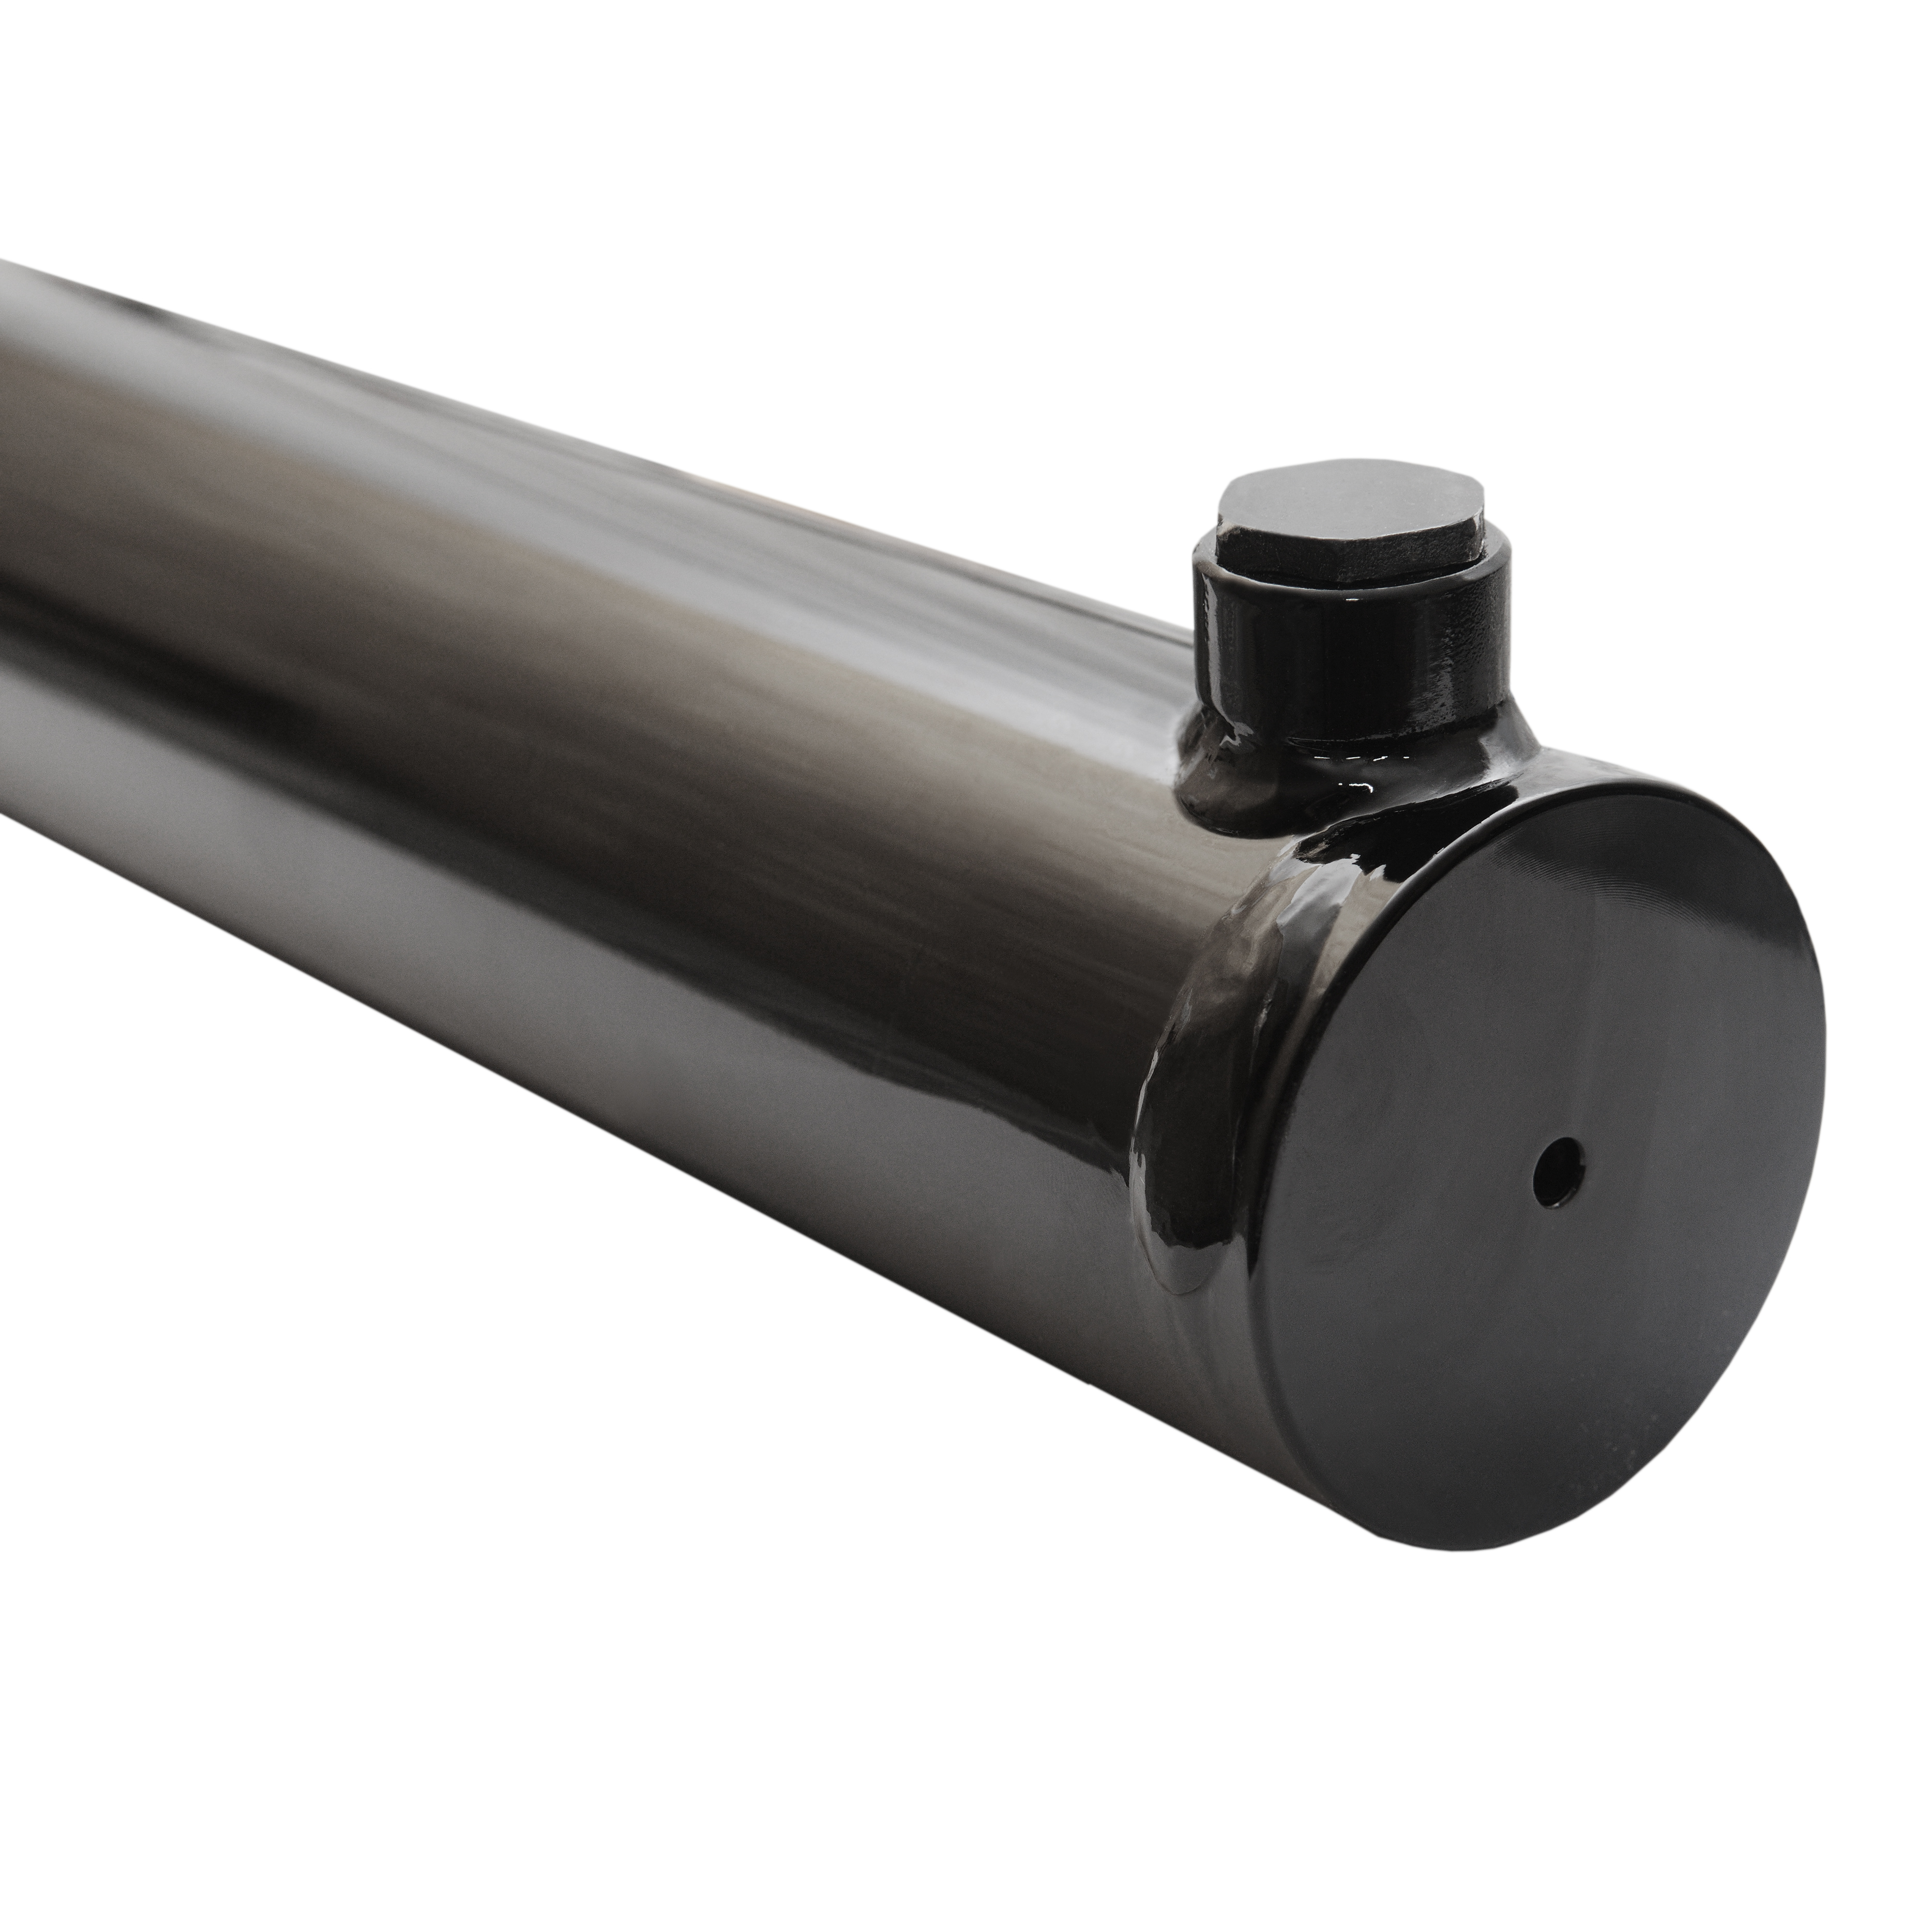 2.5 bore x 17 stroke hydraulic cylinder, welded universal double acting cylinder | Magister Hydraulics